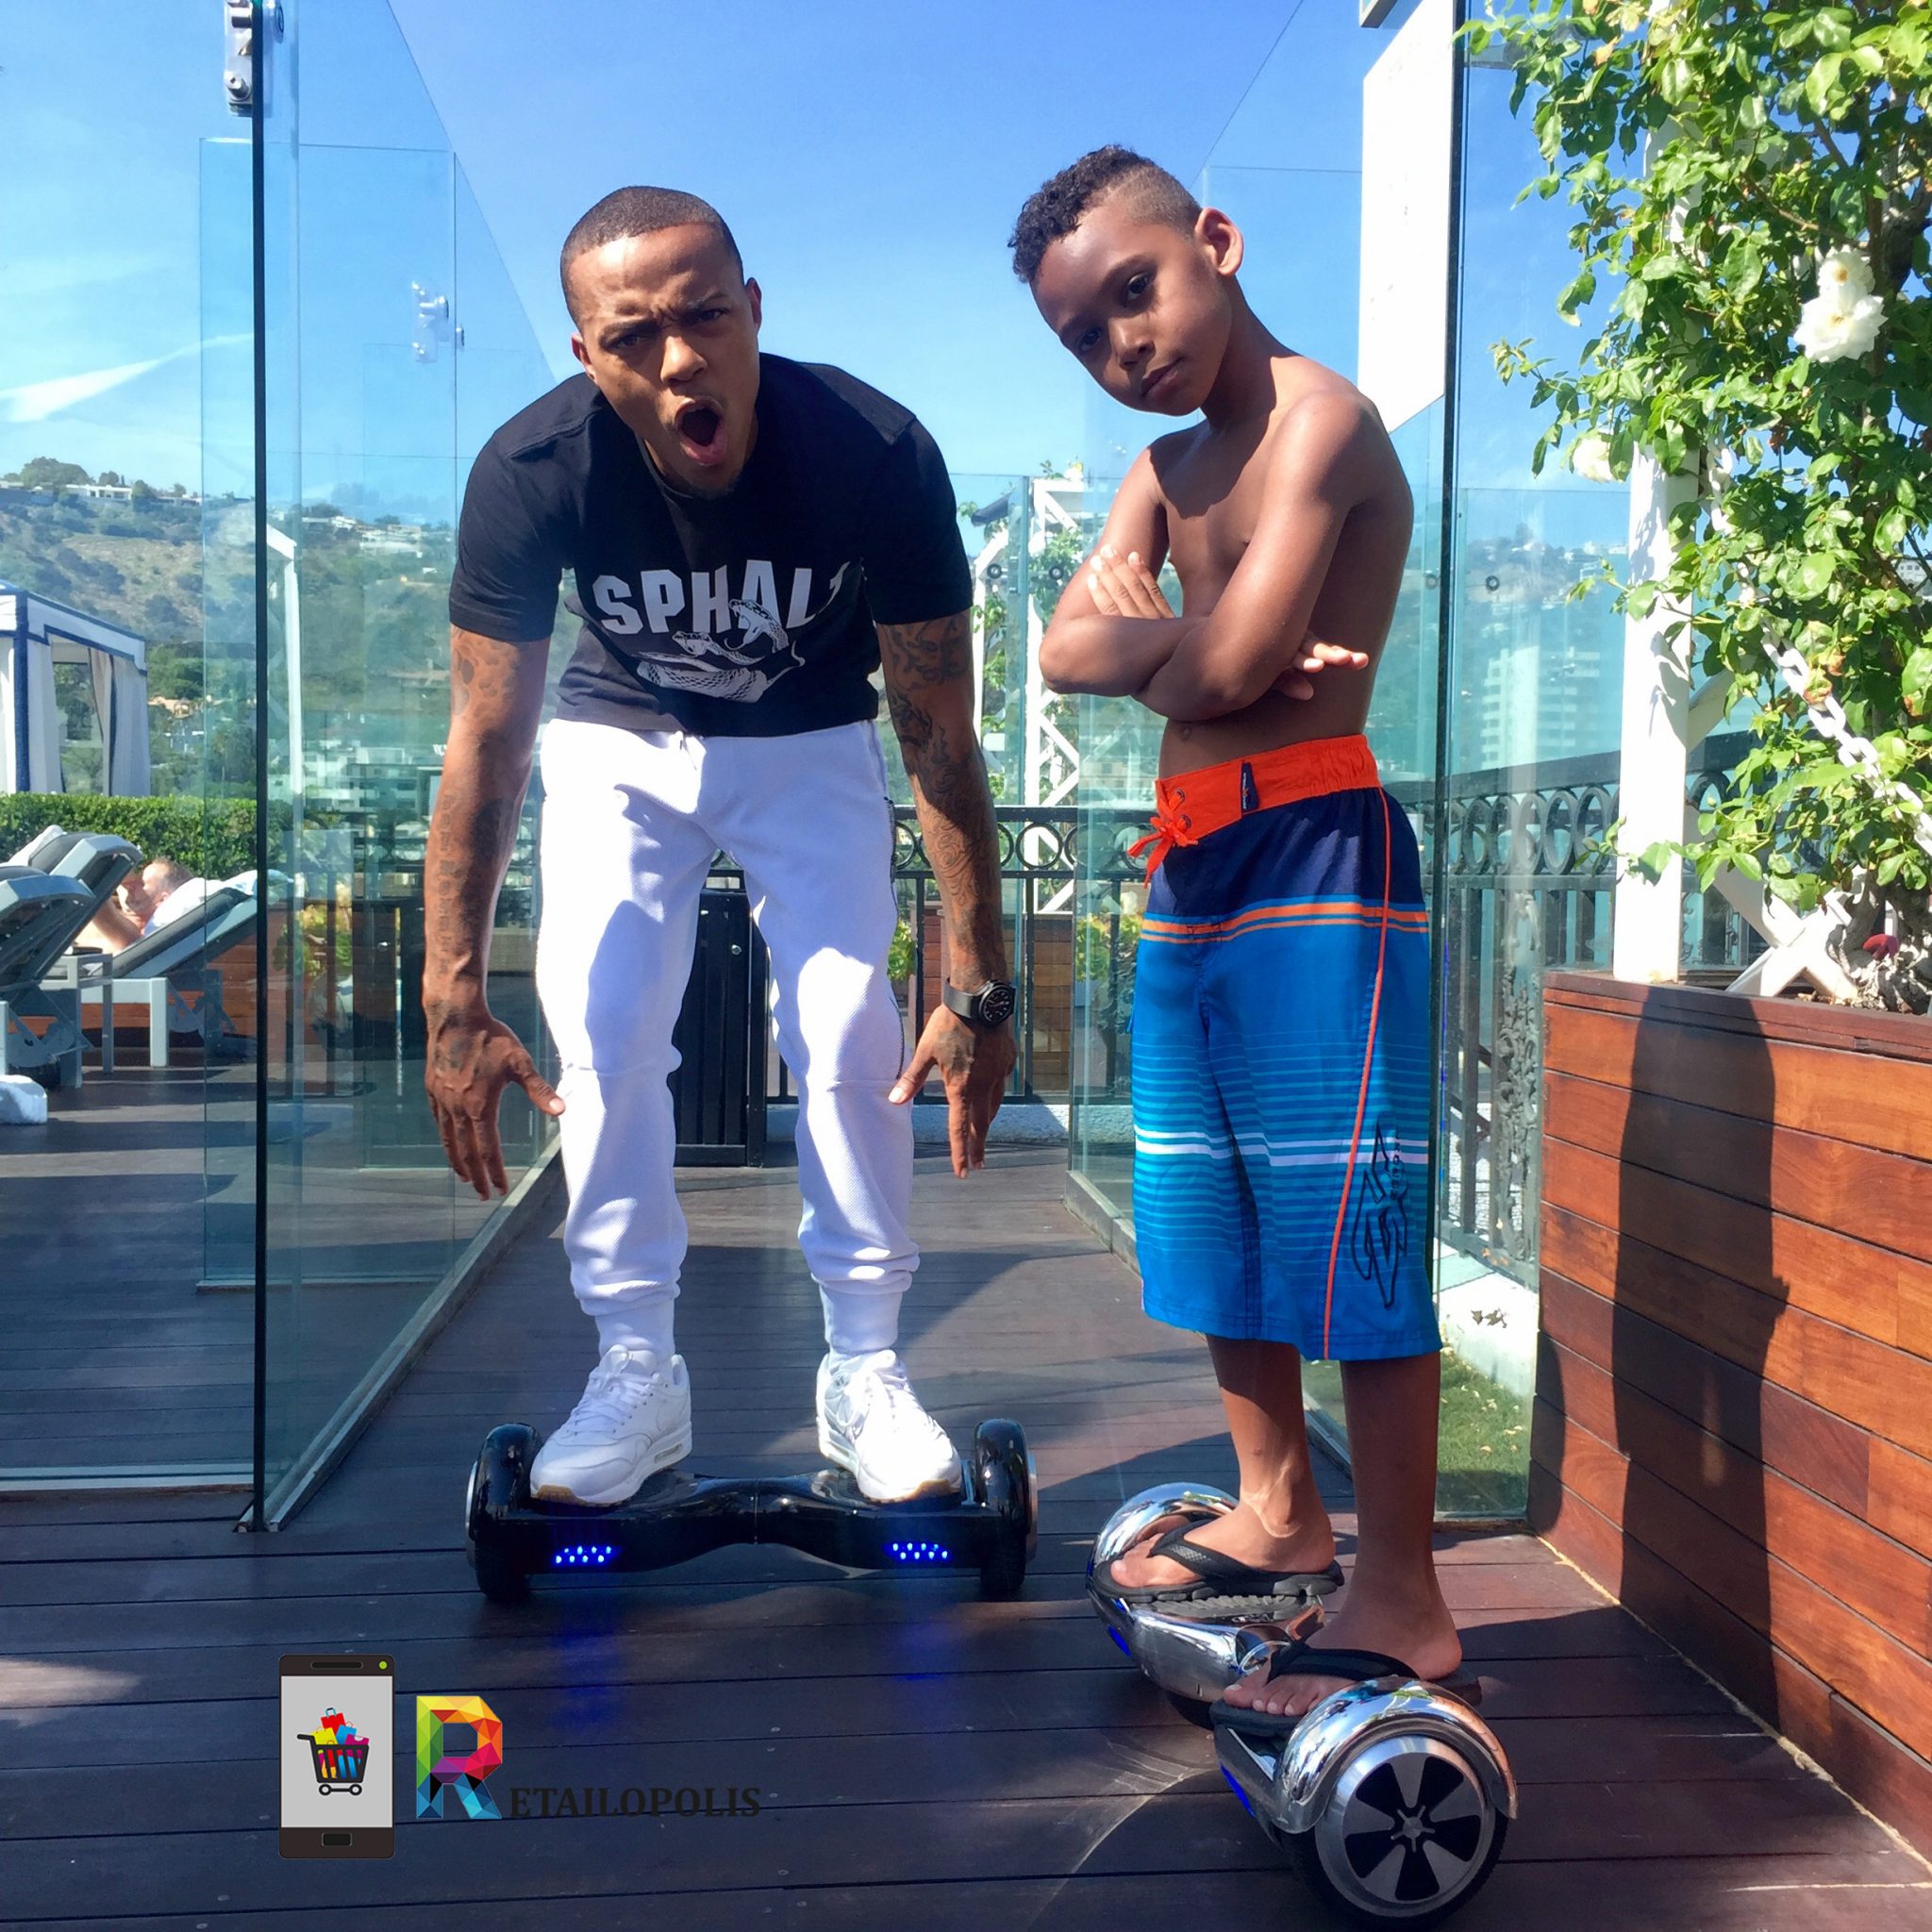 Rapper/Actor Shad Moss aka “Bow Wow” Rocks with Retailopolis!